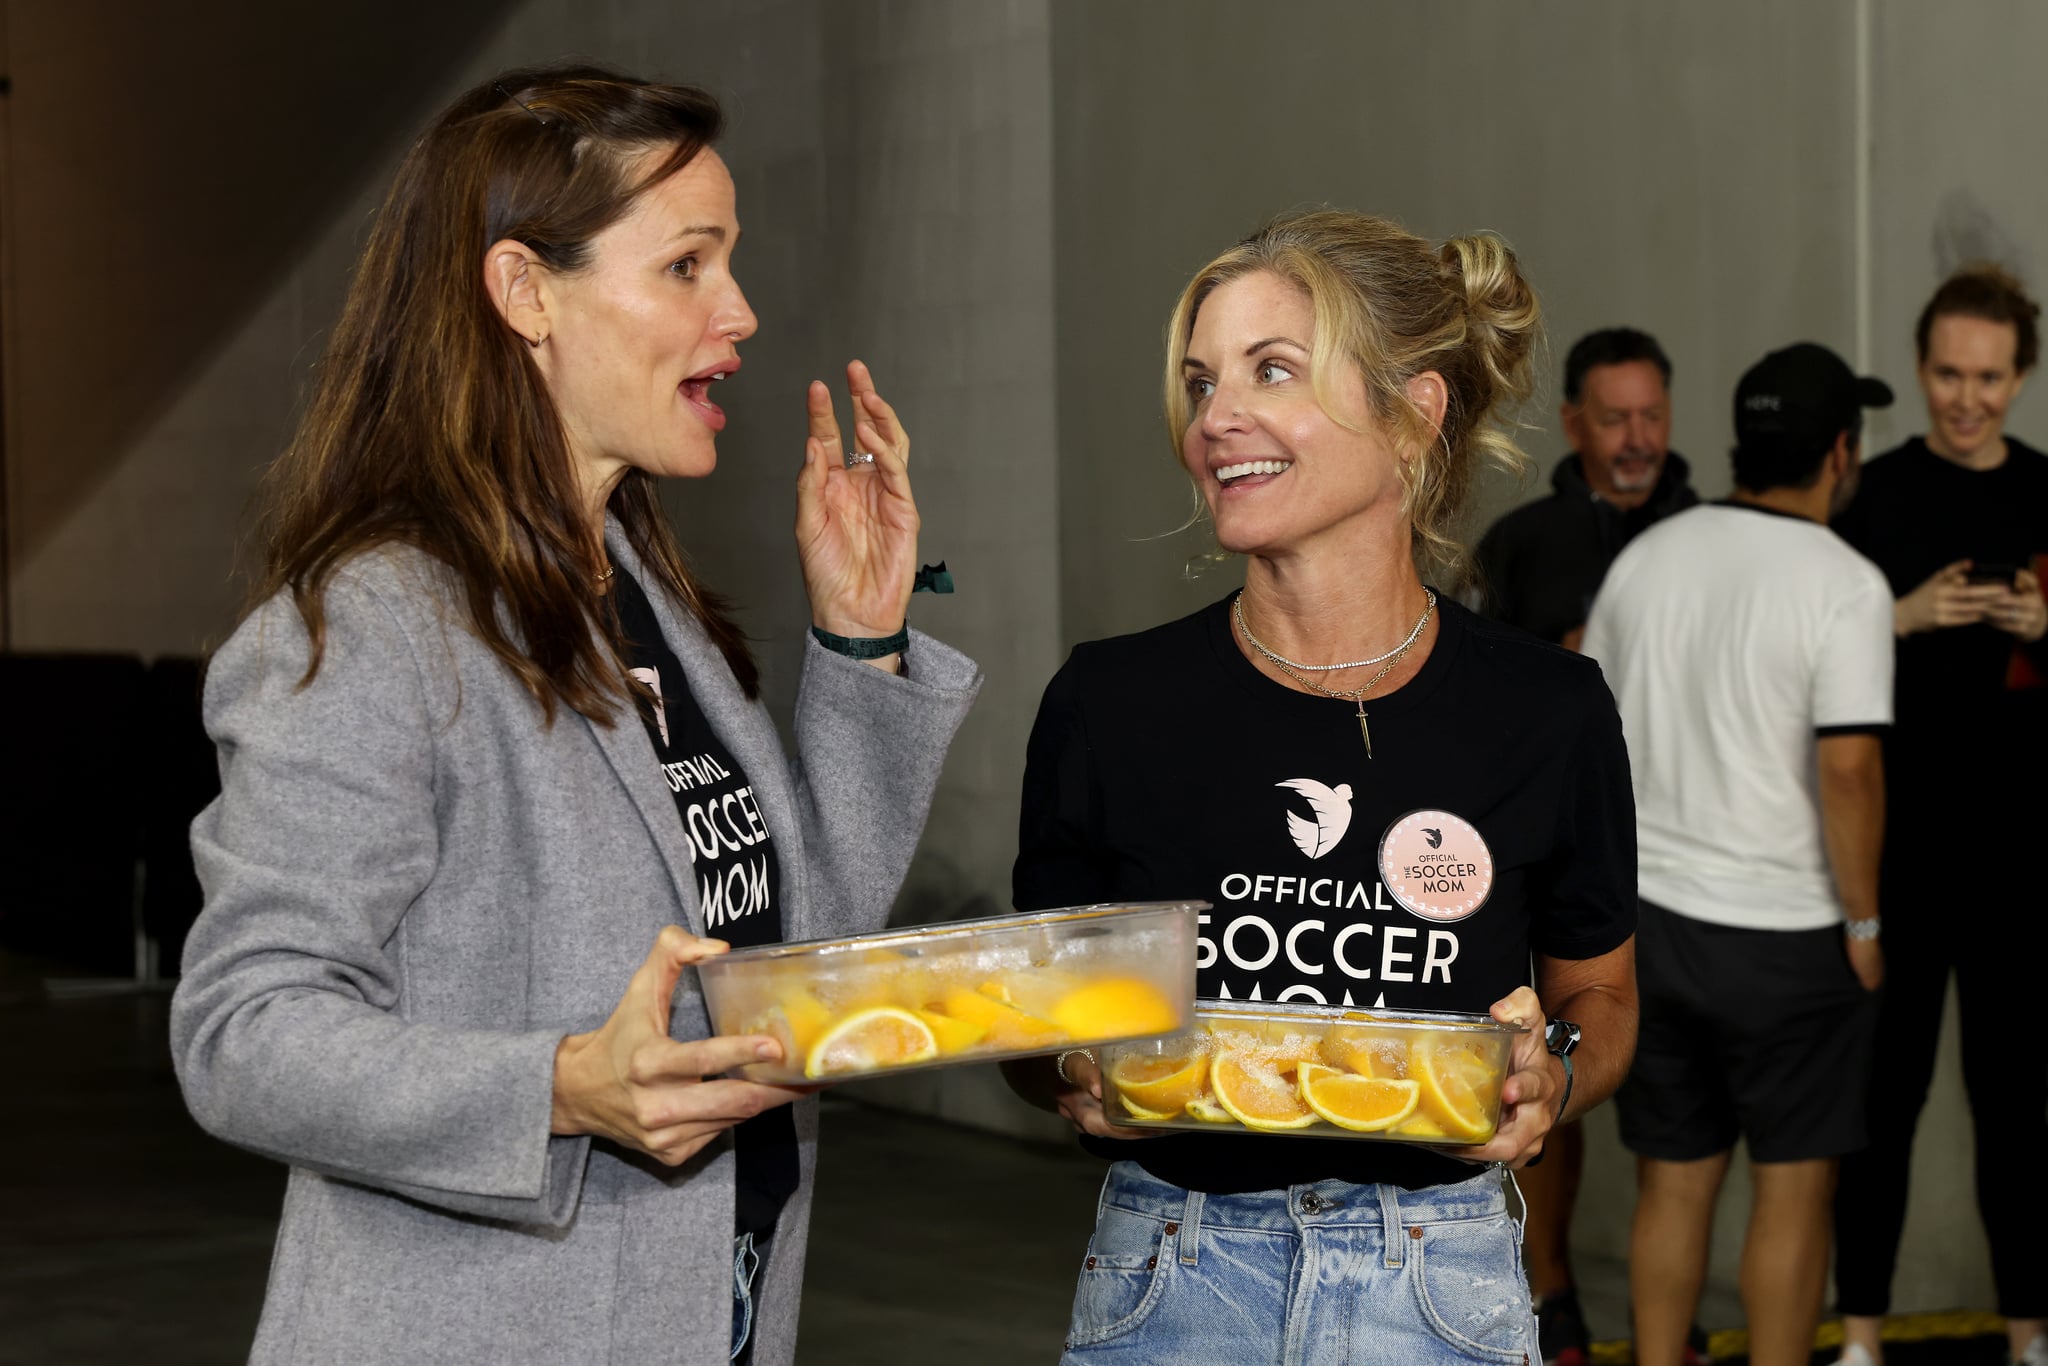 LOS ANGELES, CALIFORNIA - JULY 09: Angel City FC investors Jennifer Garner and Glennon Doyle look on after the game against San Diego Wave FC at Banc of California Stadium on July 9, 2022 in Los Angeles, California.  (Photo by Katelyn Mulcahy/Getty Images for Angel City FC)